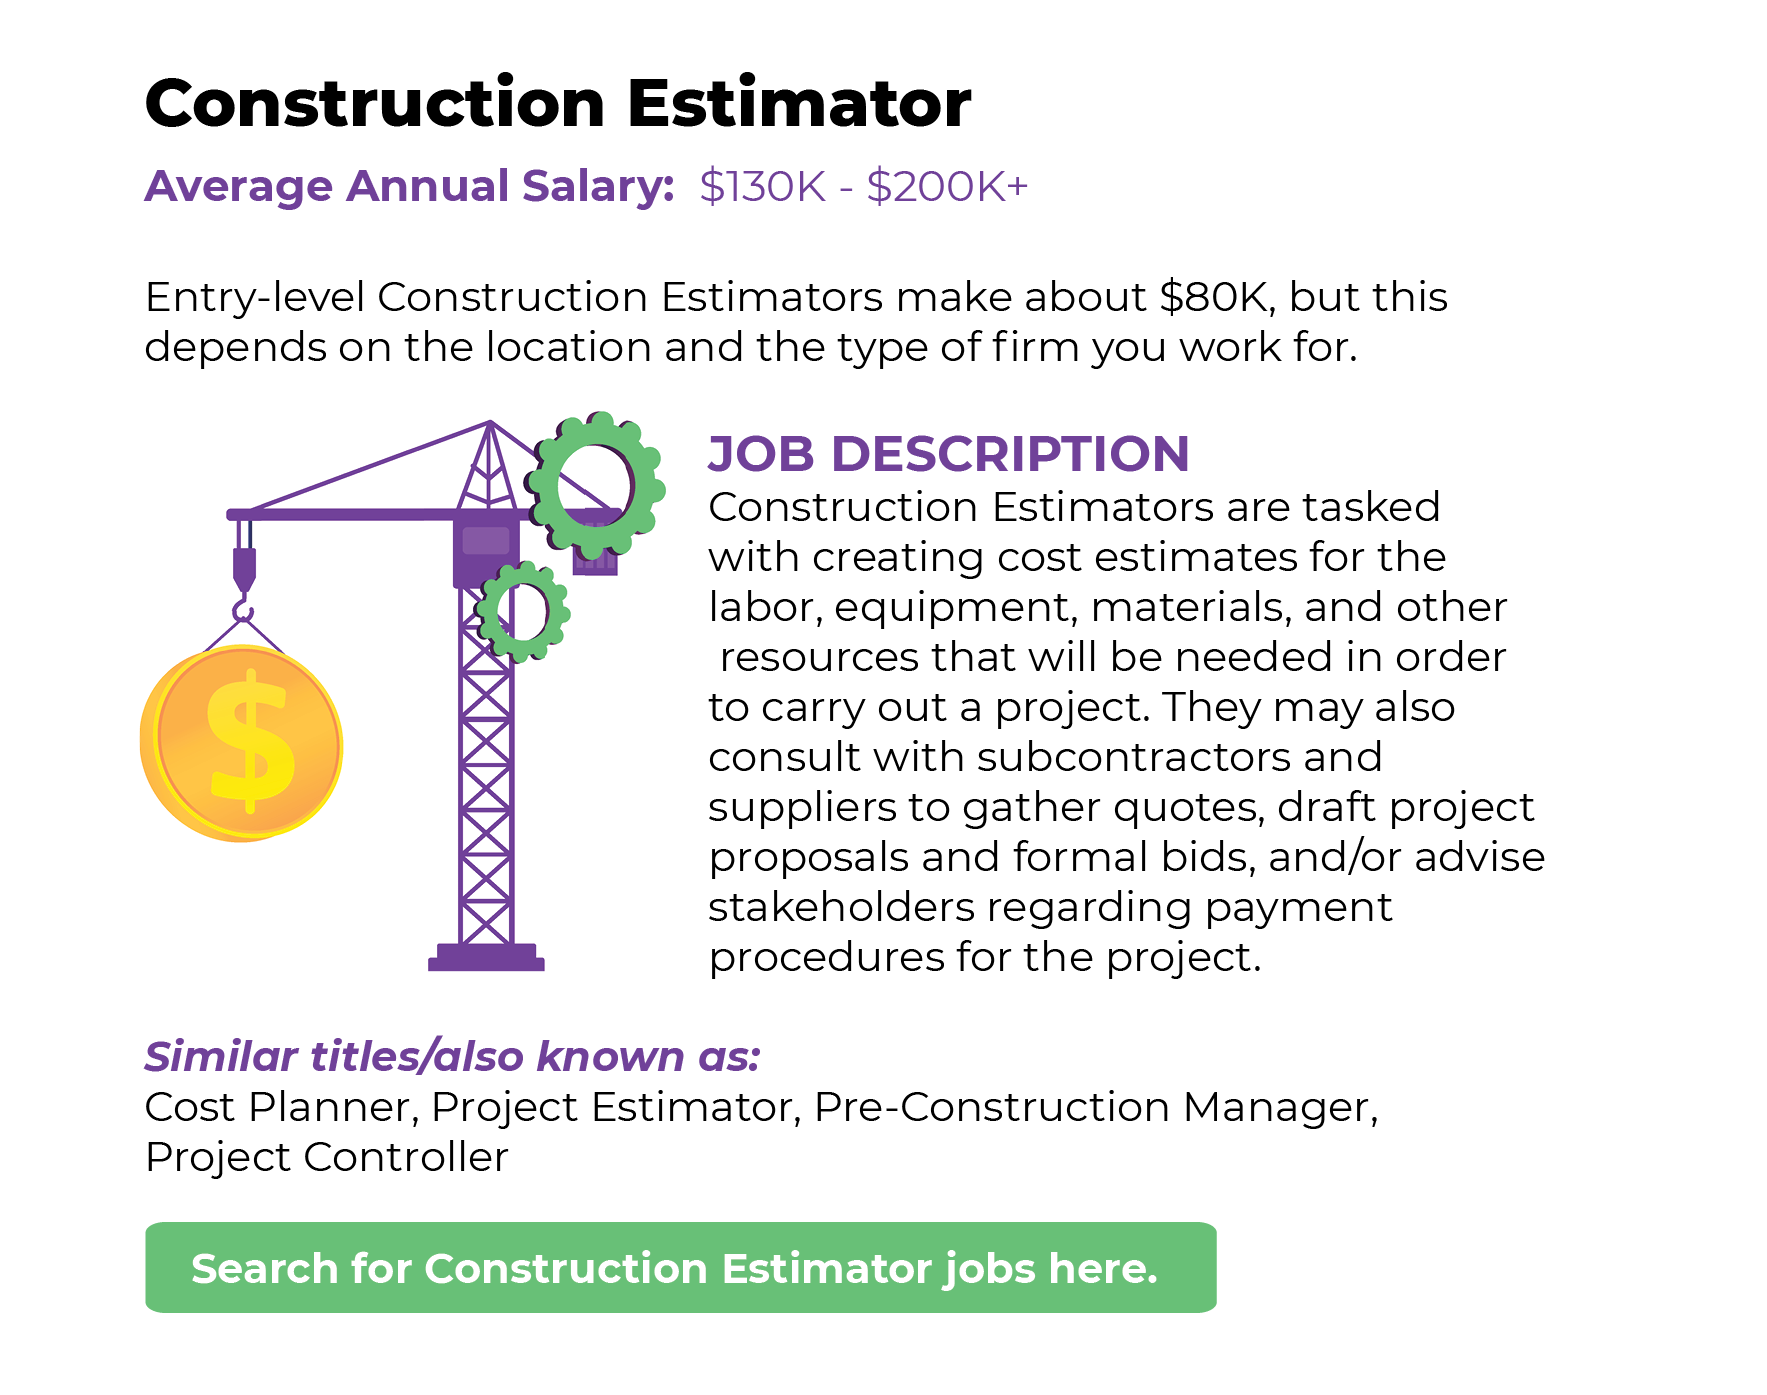 Construction Estimators are tasked with creating cost estimates for the labor, equipment, materials, and other resources that will be needed in order to carry out a project. They may also consult with subcontractors and suppliers to gather quotes, draft project proposals and formal bids, and/or advise stakeholders regarding payment procedures for the project.